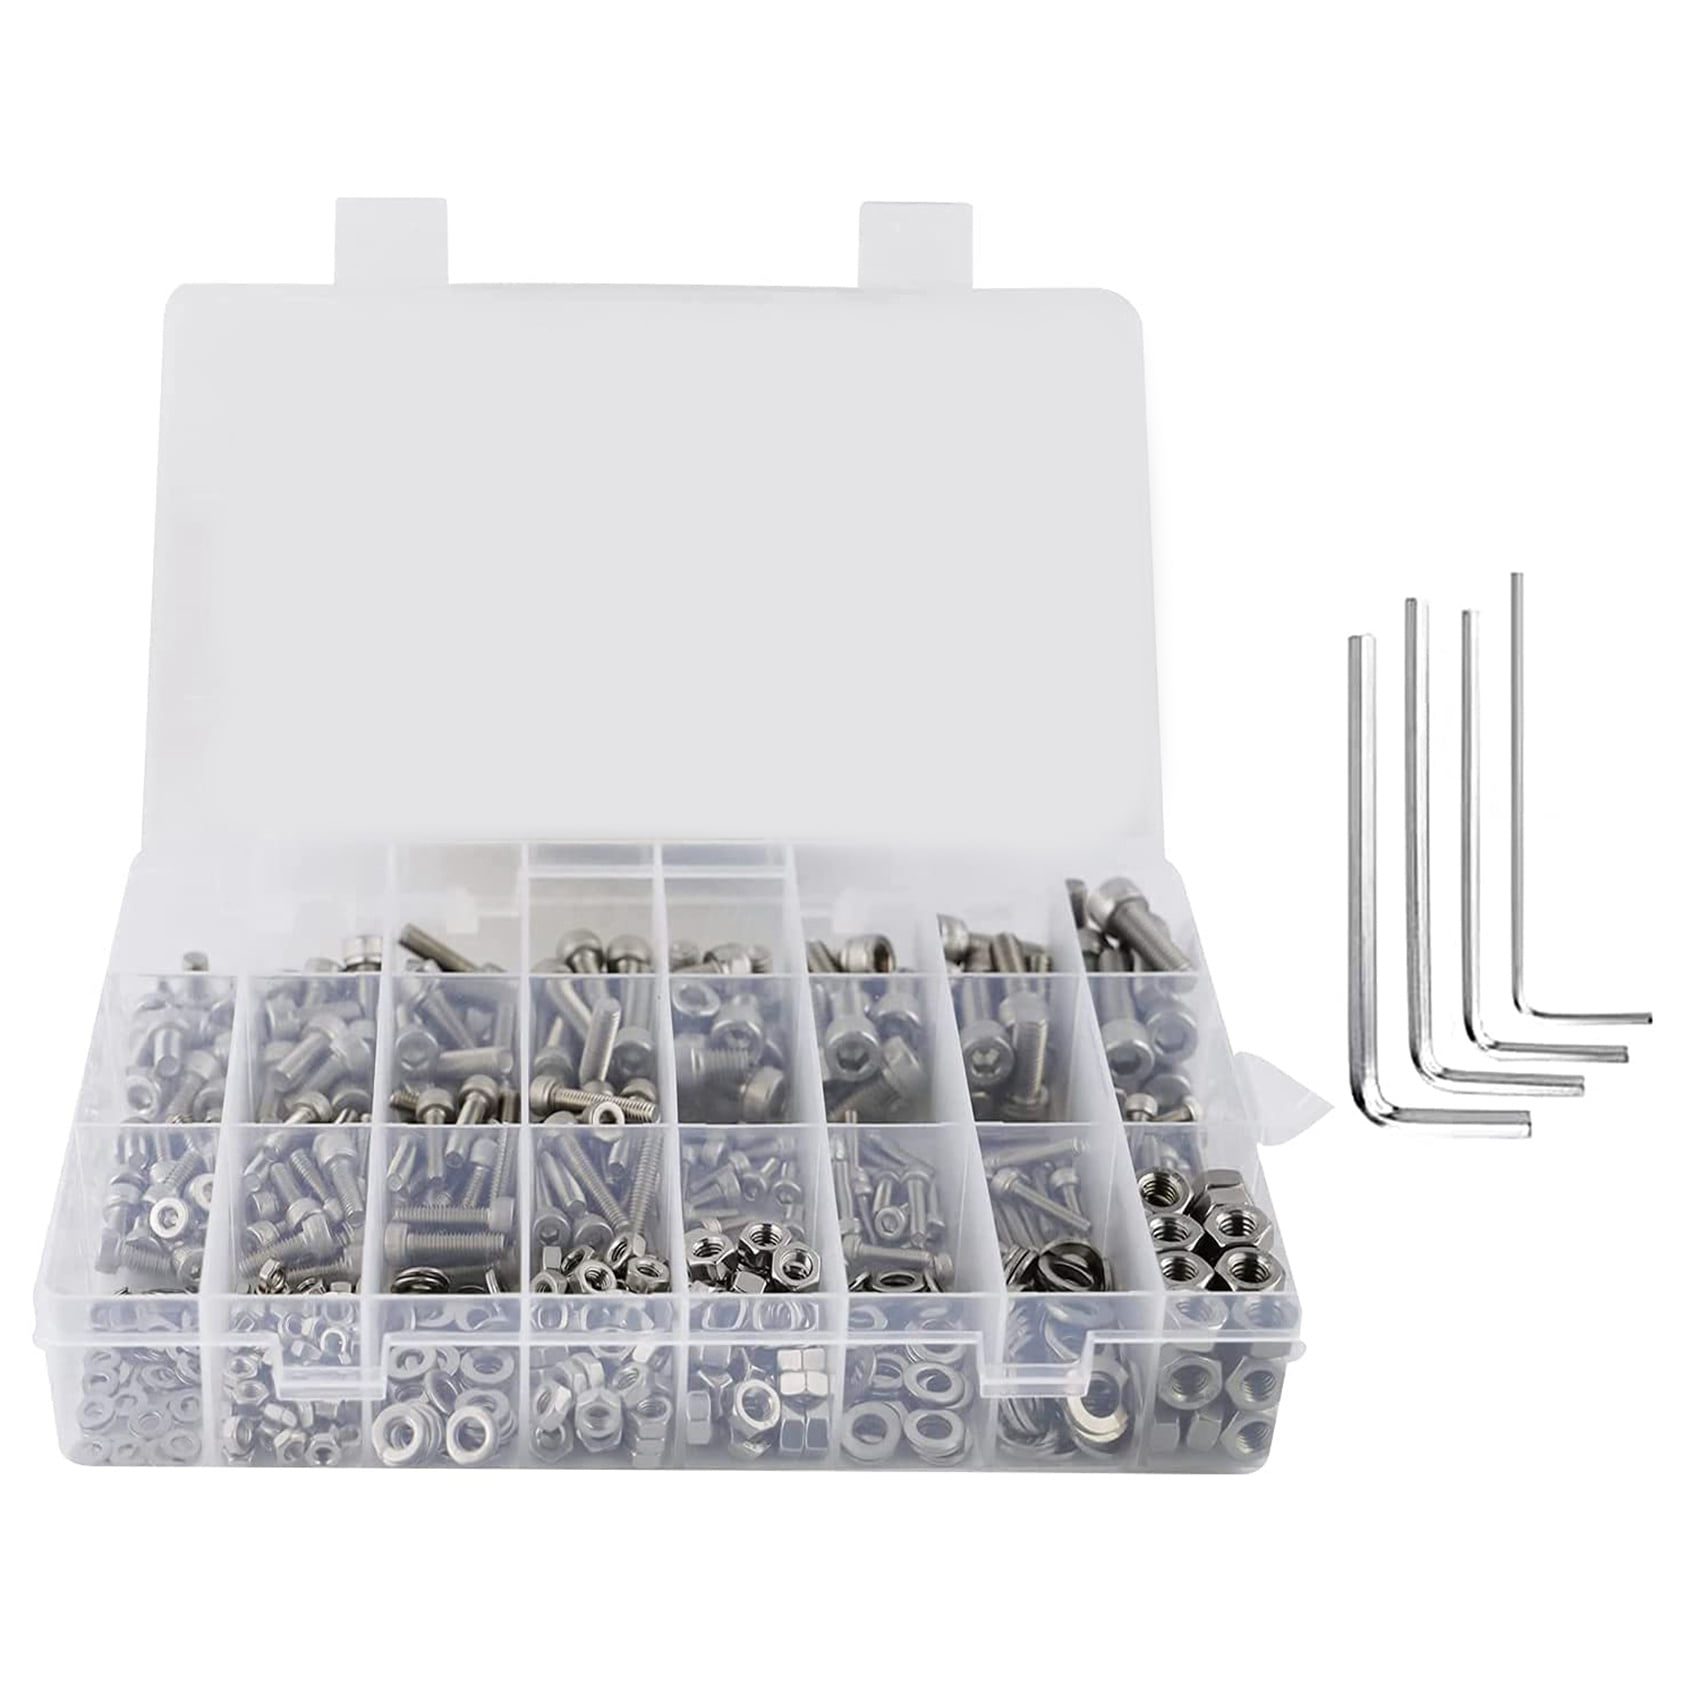 500pcs Set M3 M4 M5 Screw Bolts and Nuts Precise Hex Head Cap Stainless Steel UK 